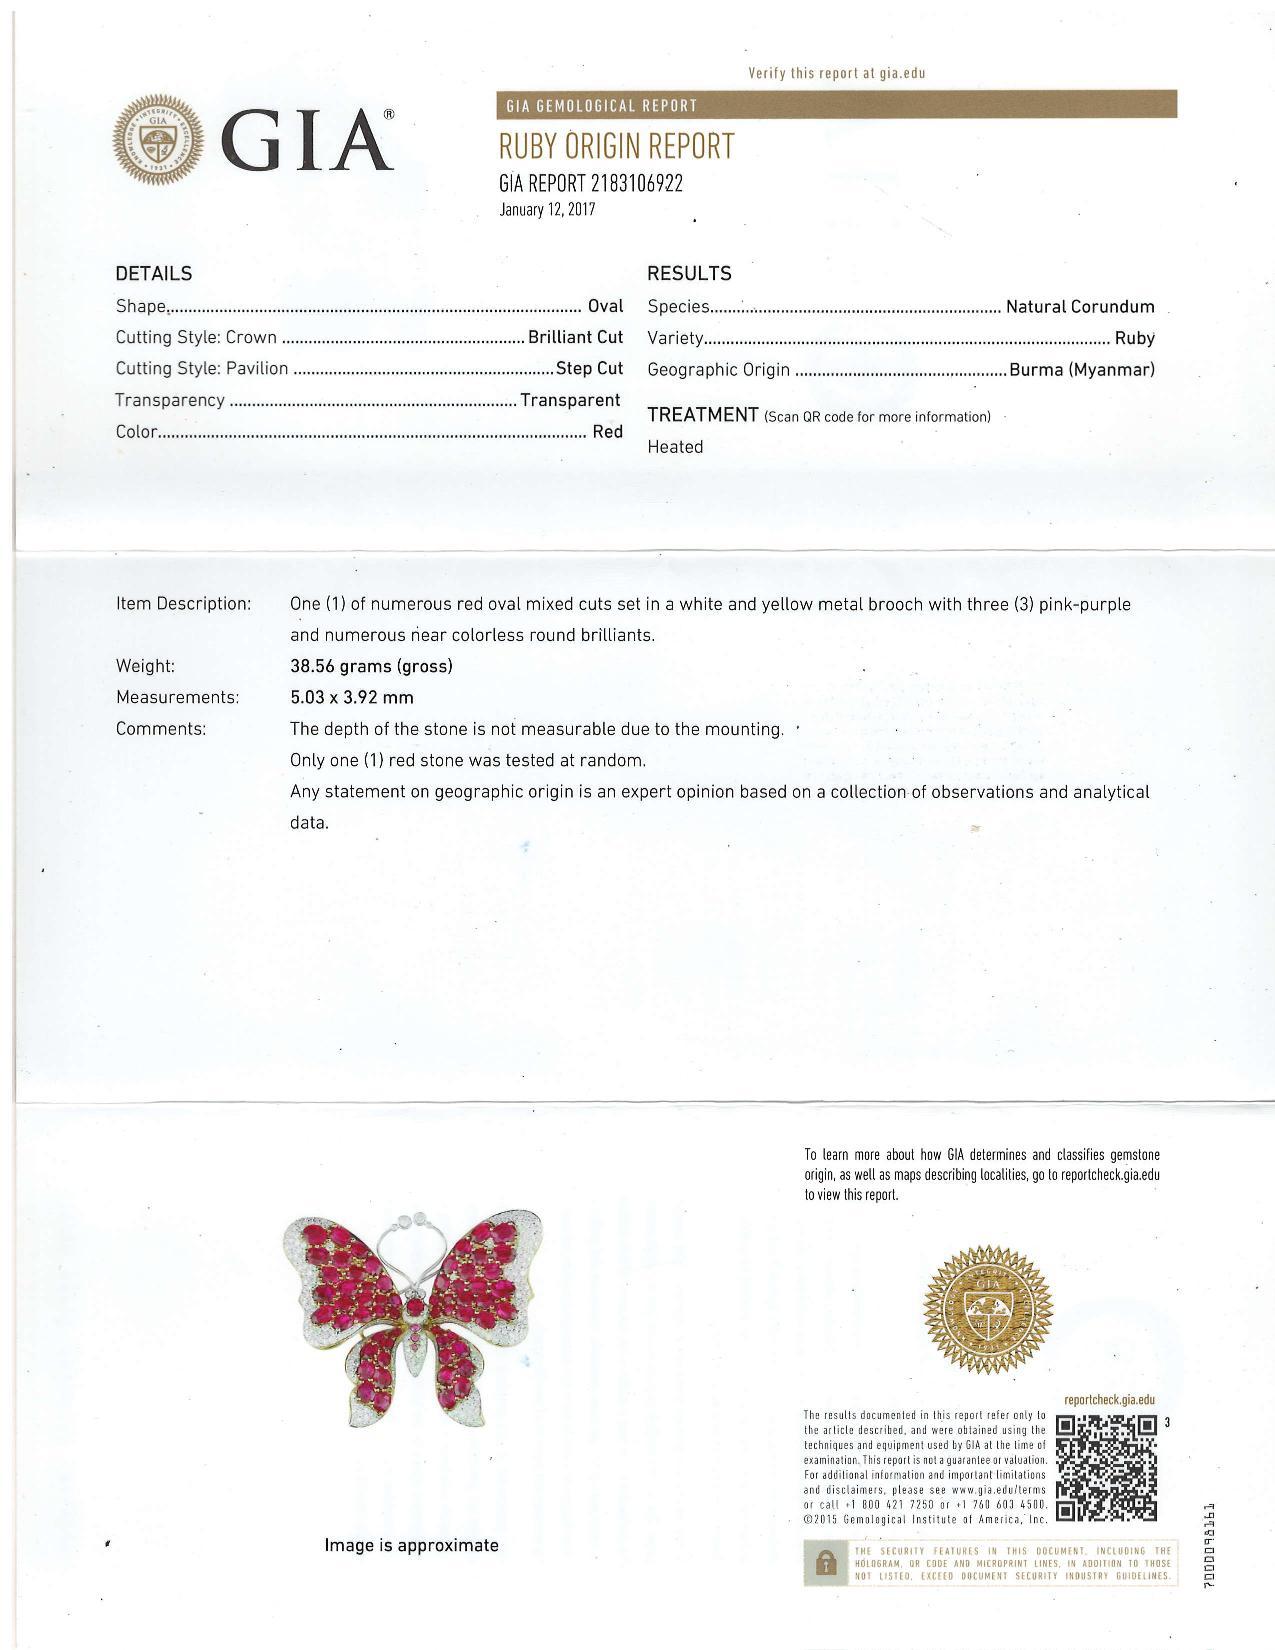 Wow! What a beautiful statement piece! This large butterfly pin is collection worthy, featuring Burmese rubies, pink sapphires, and over 300 brilliant cut diamonds. The rubies are extremely high quality and well-matched, displaying the ideal pinkish